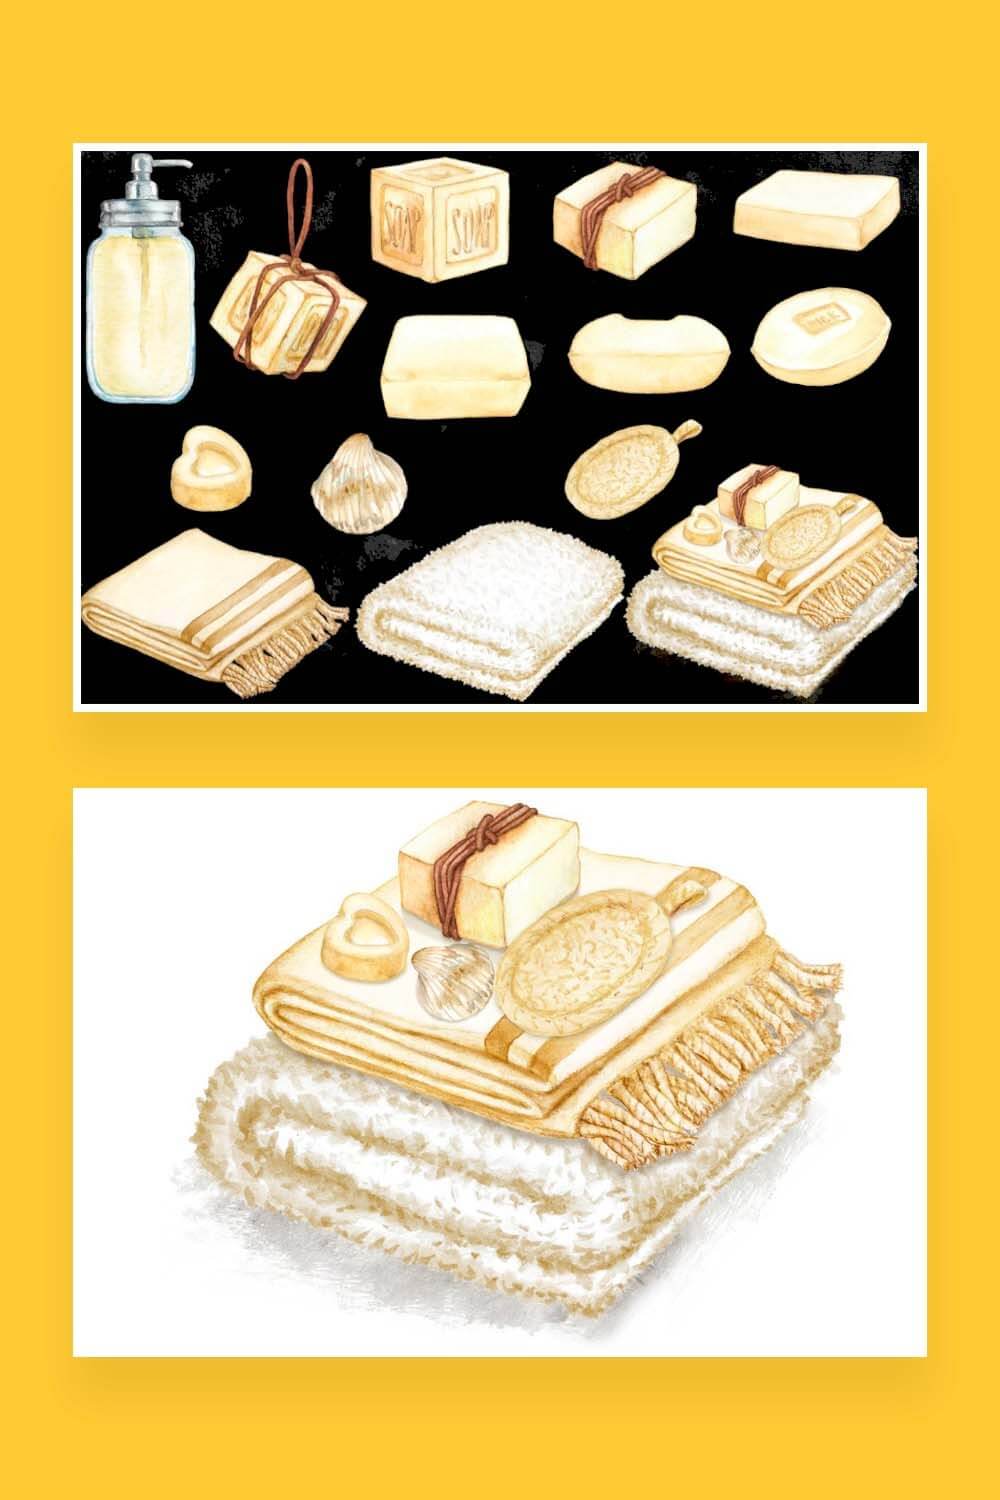 Image Clipart Homemade soap on yellow background for Pinterest.